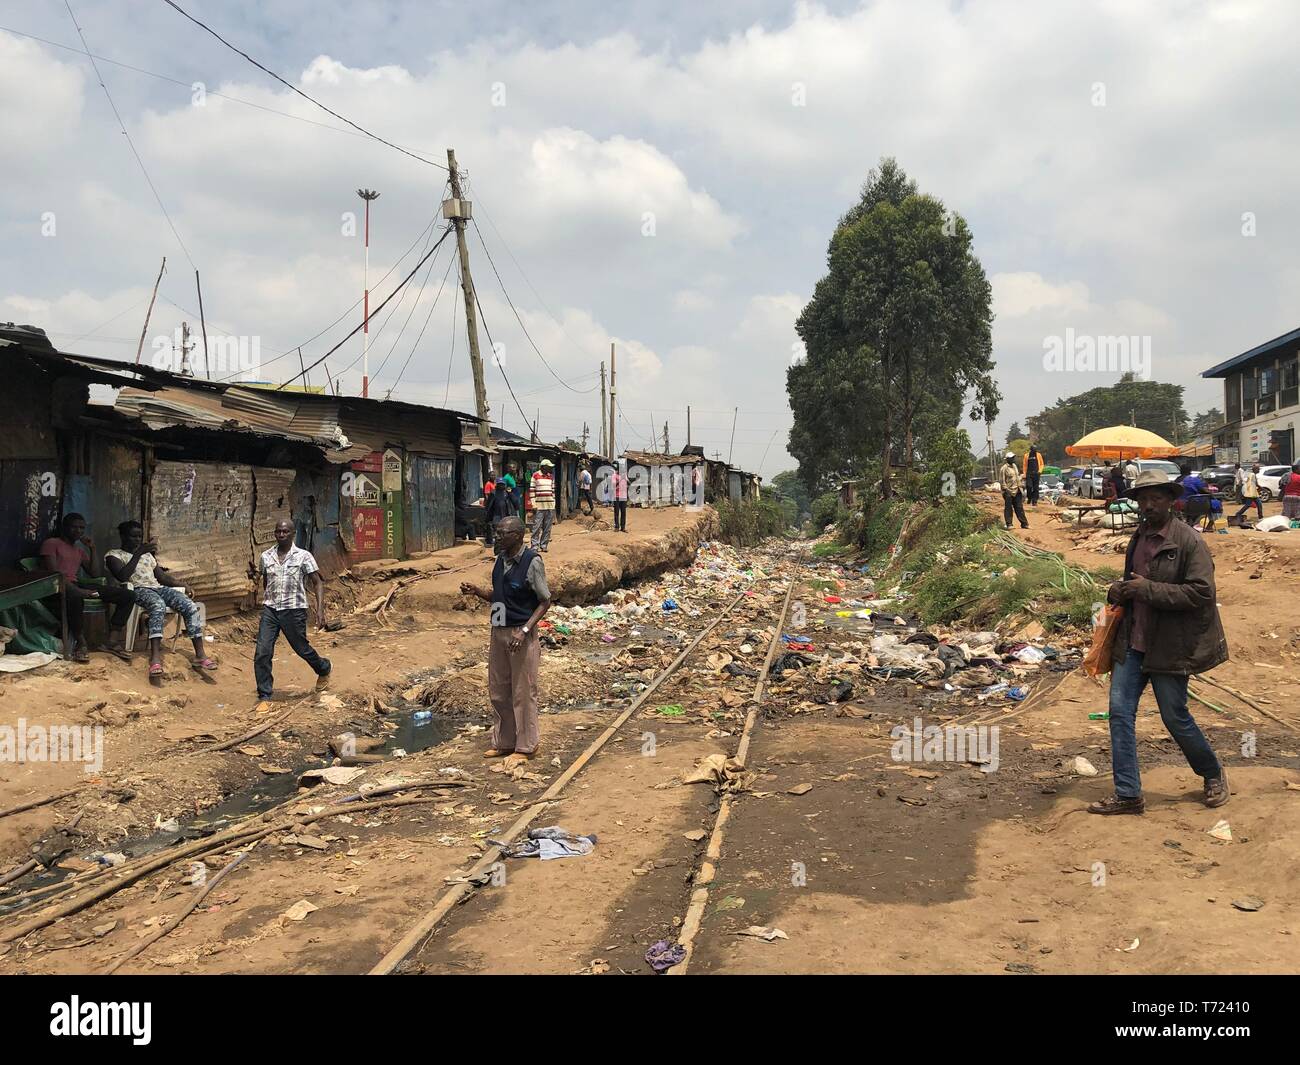 The Kibera slum in western Nairobi, Kenya, where Foreign Secretary Jeremy Hunt visited at the end of his week long trip to Africa. Stock Photo